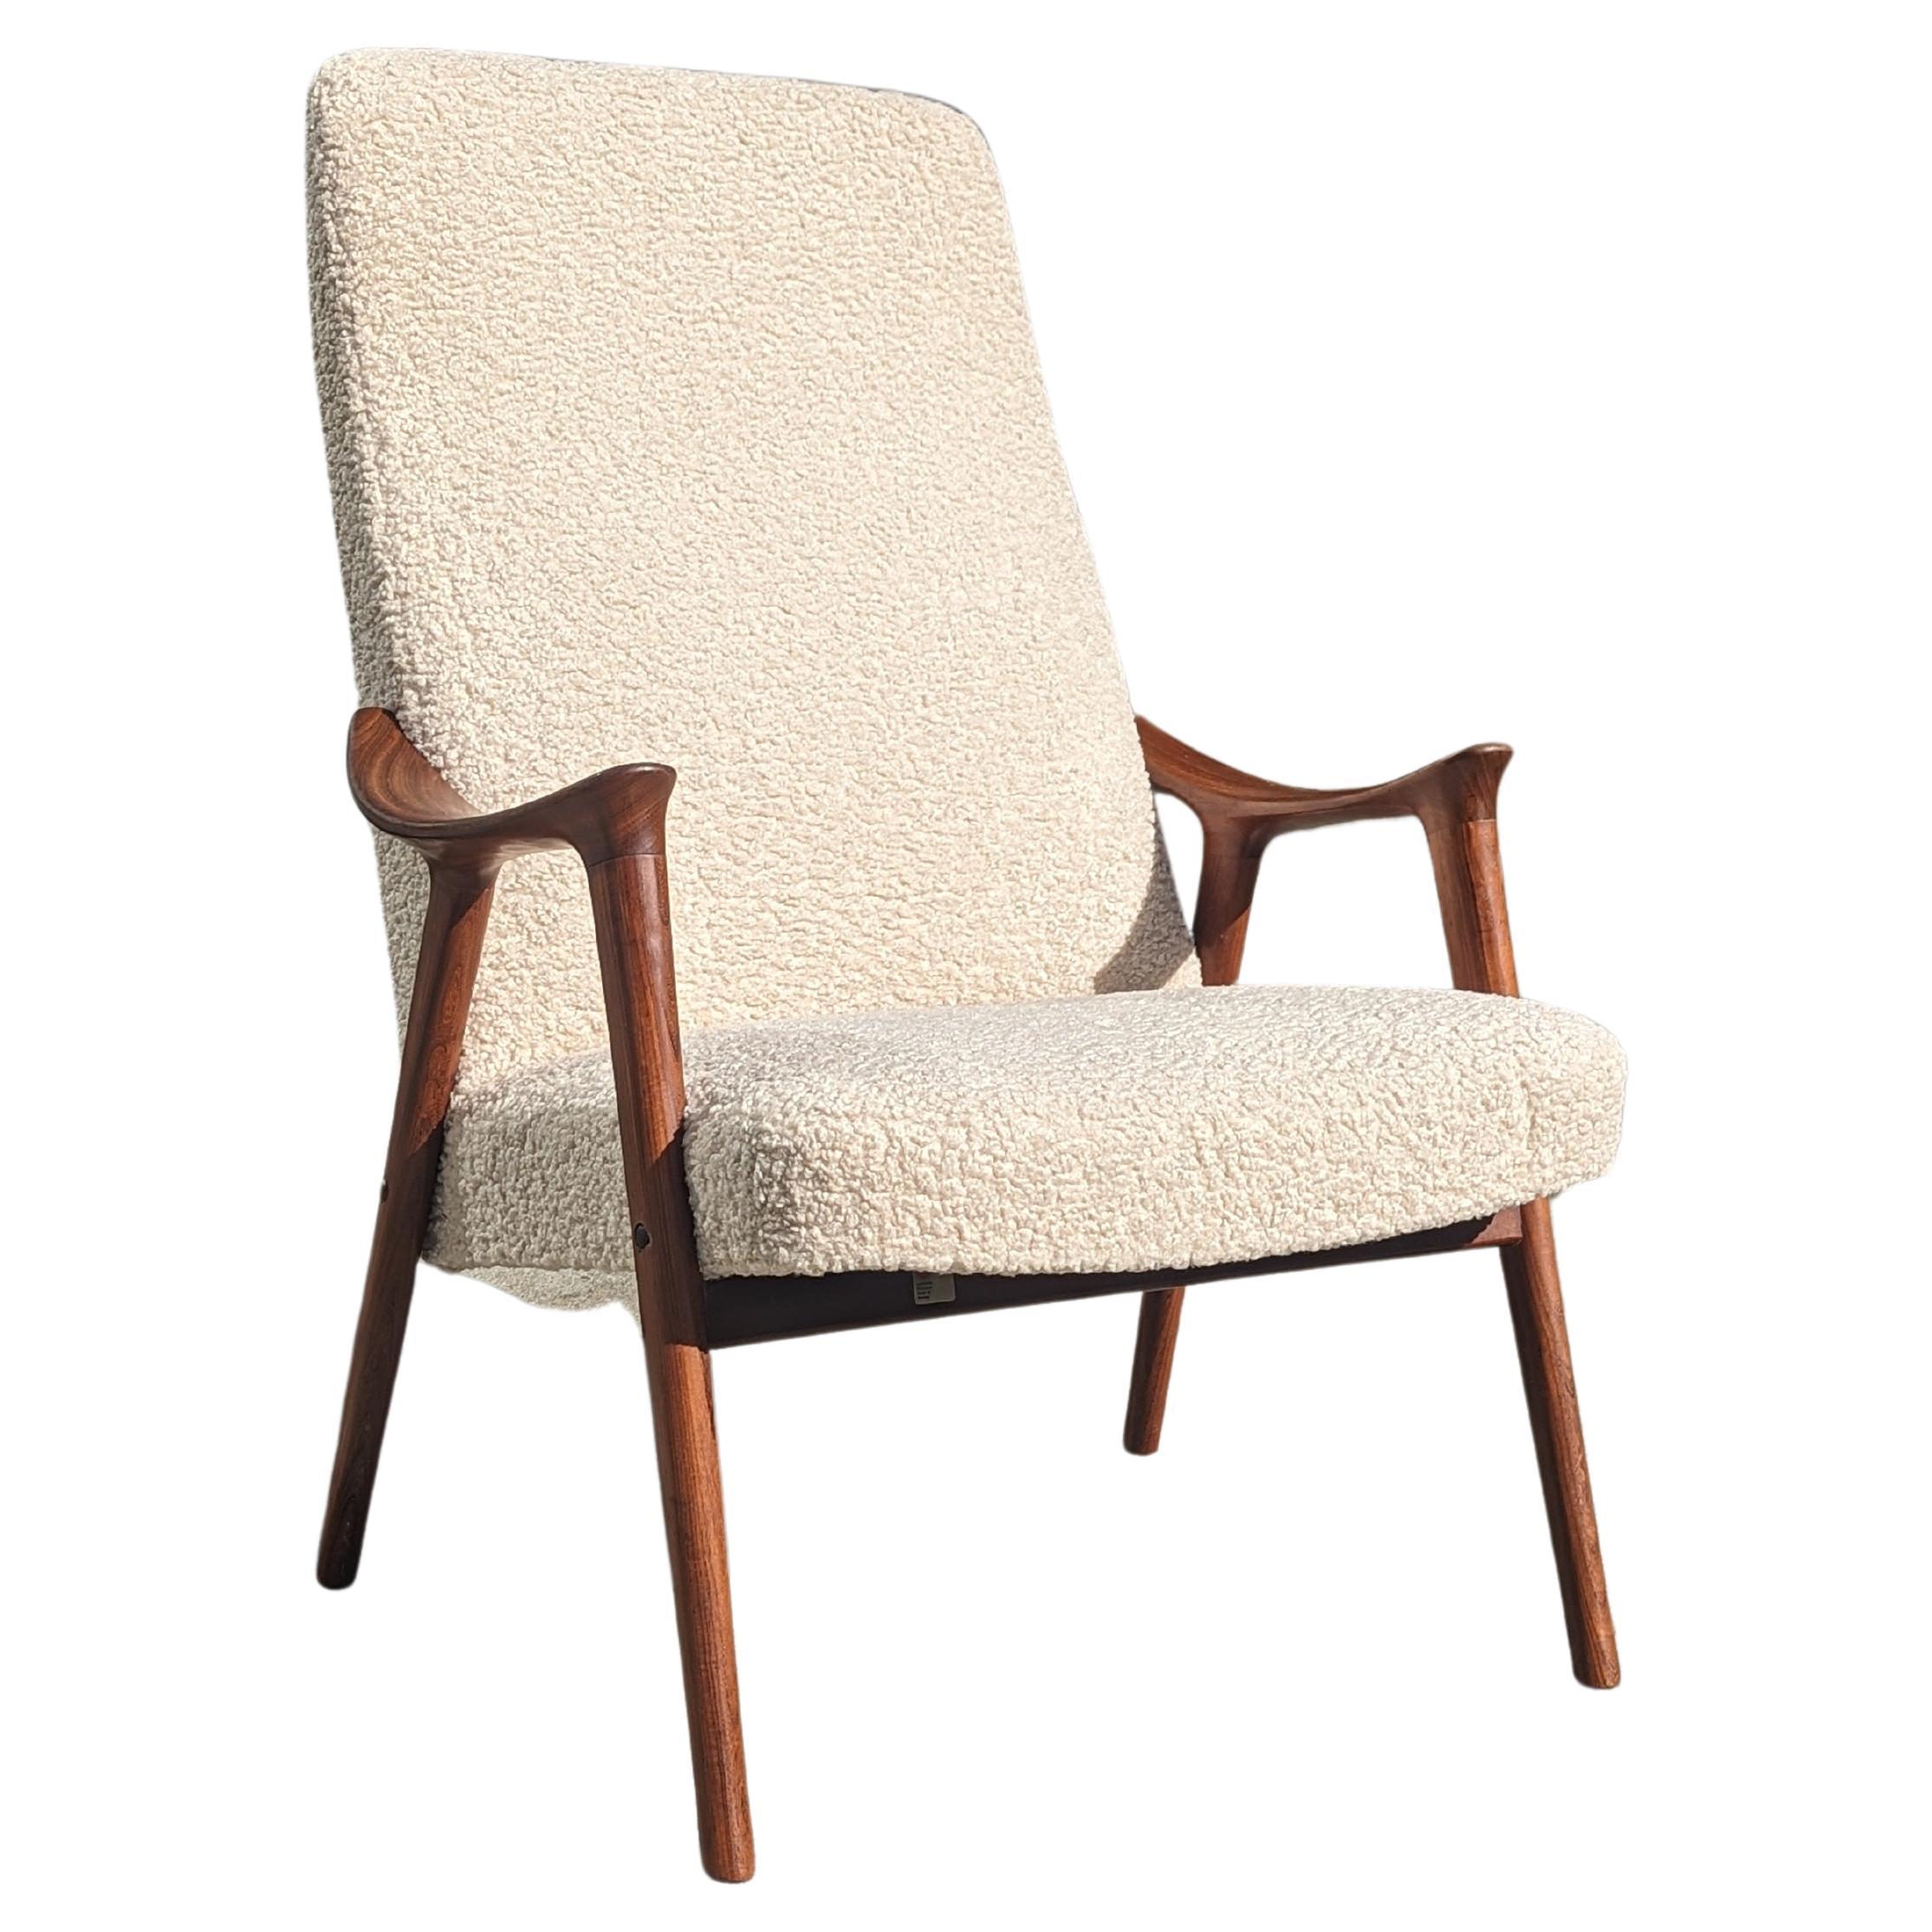  The 1960s Westnofa Scoop Lounge Chair, a Danish Design Dream  For Sale